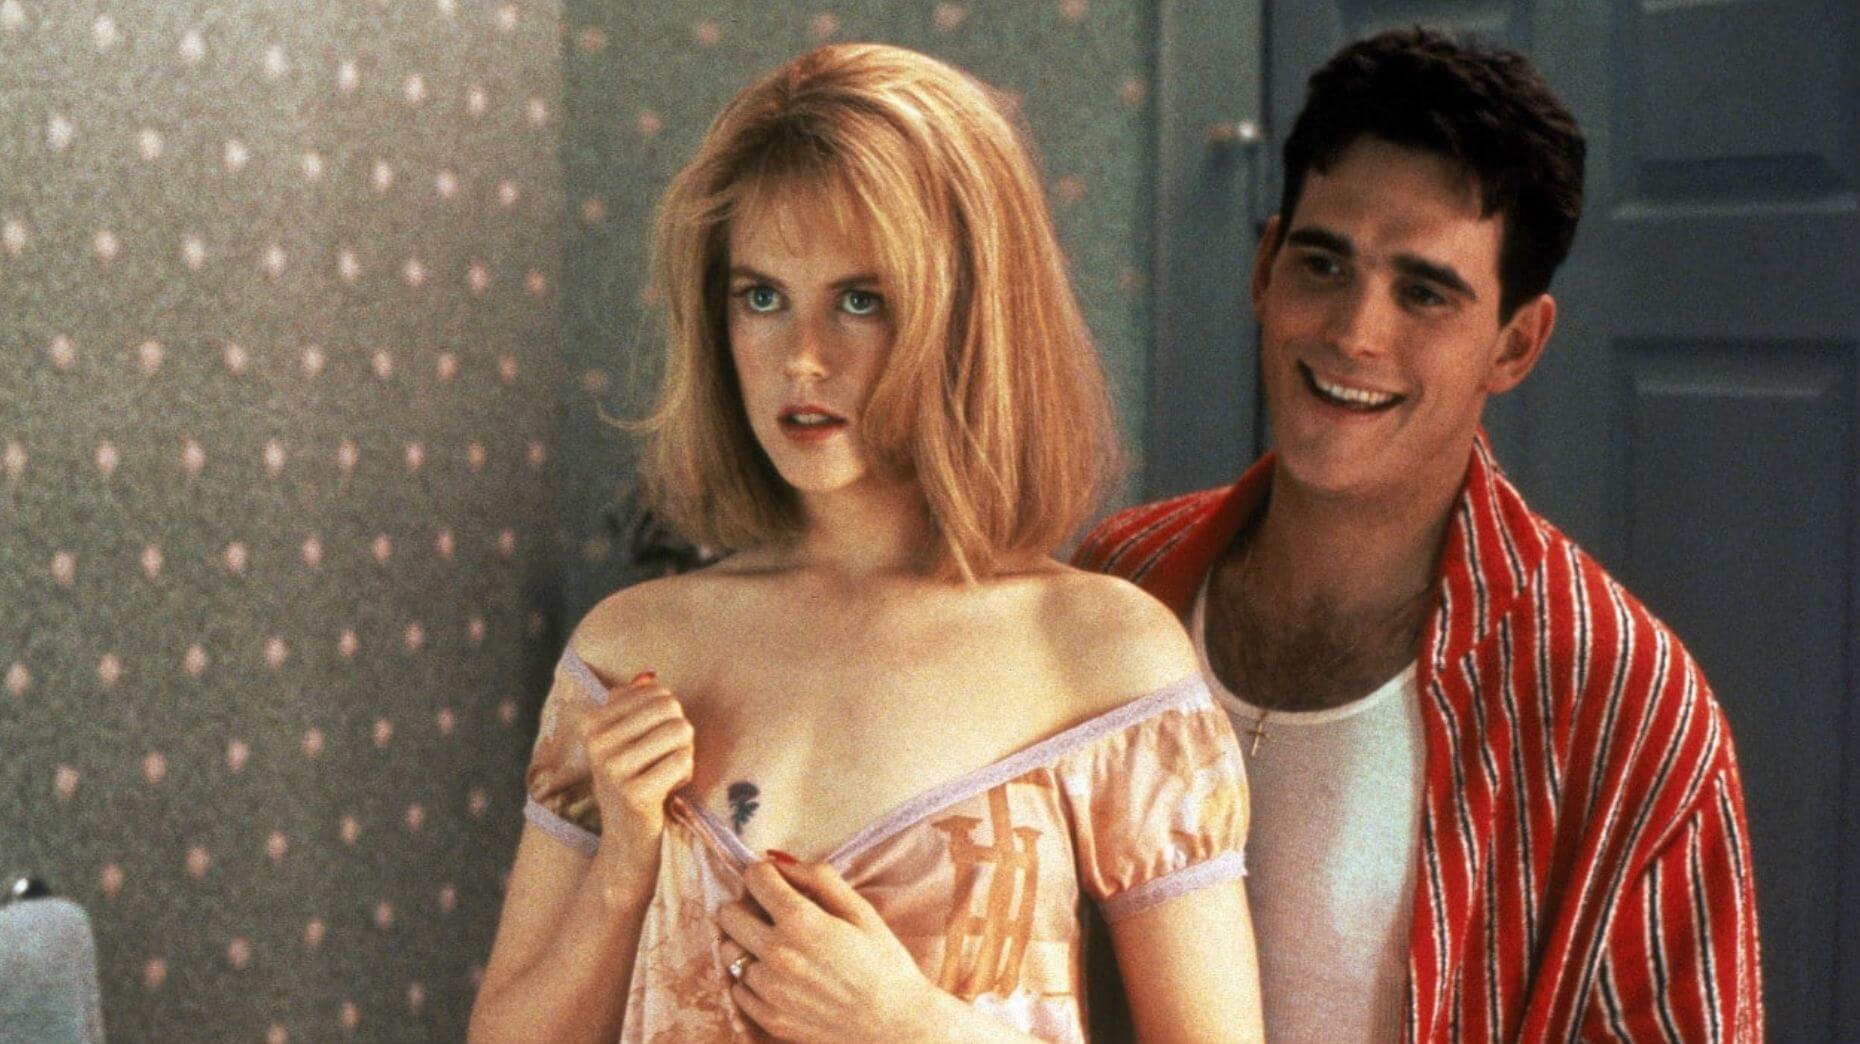 Nicole Kidman and Matt Dillon in To Die For.